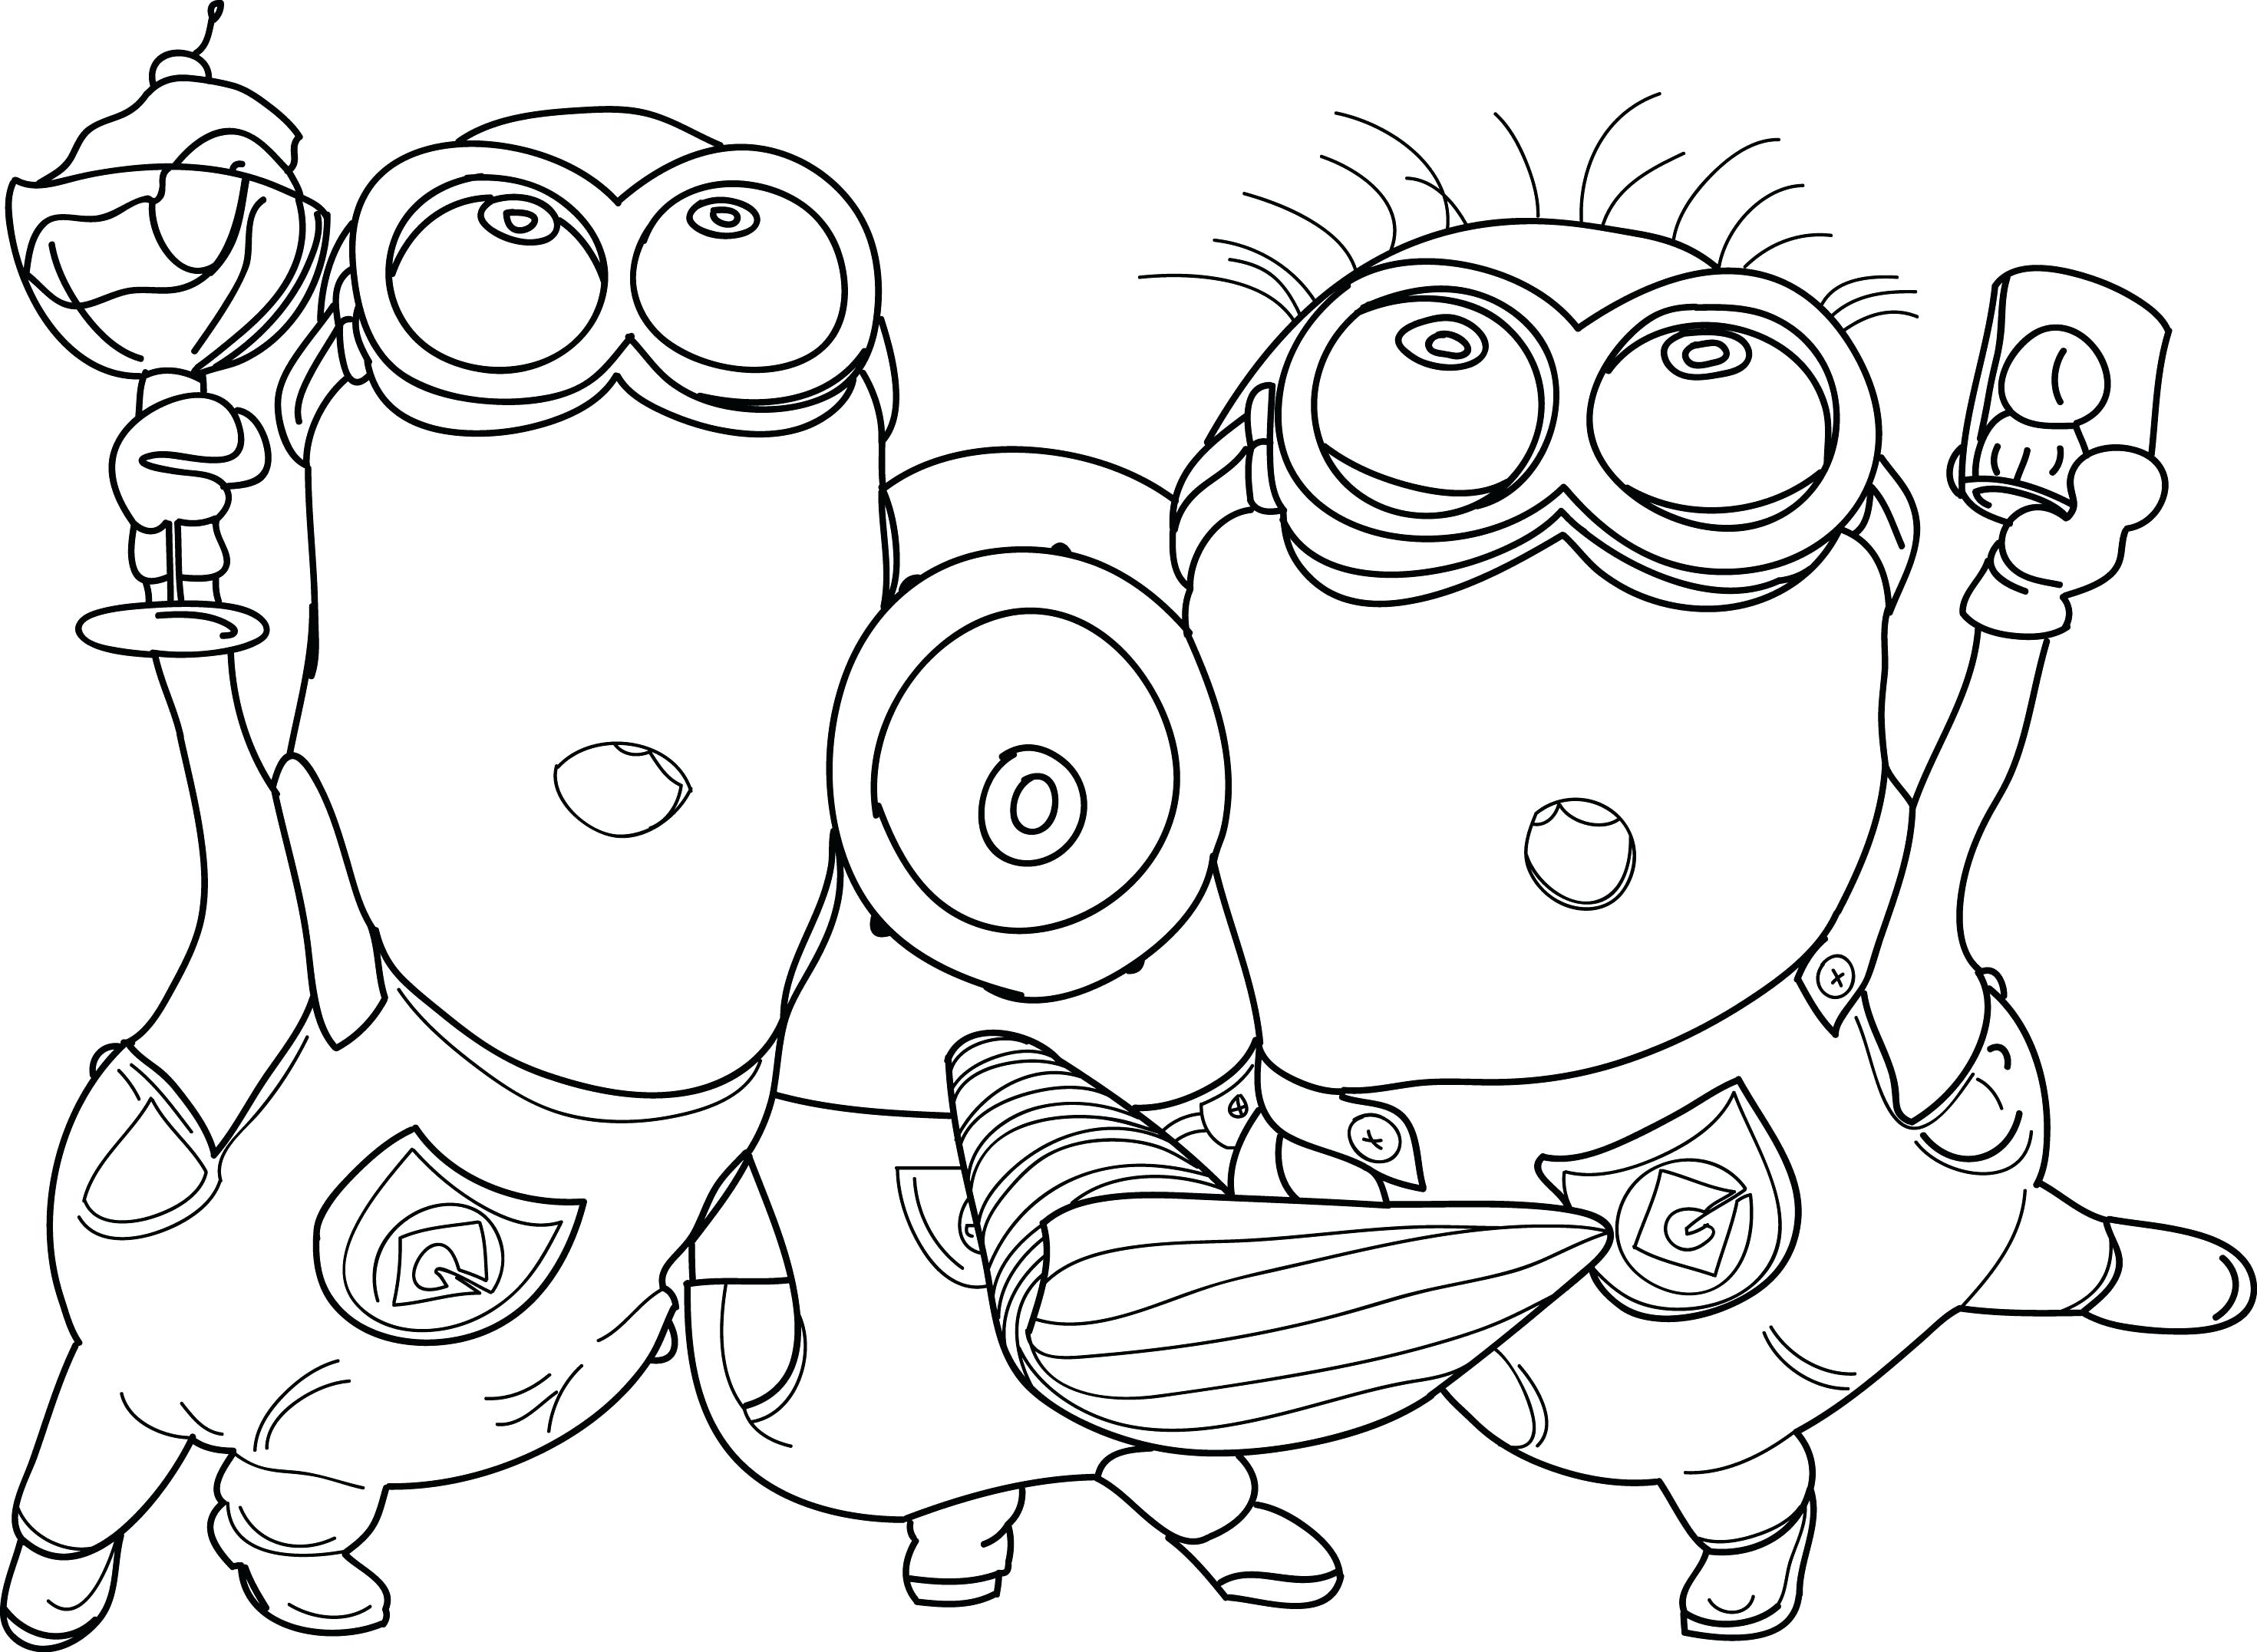 Minions Coloring Pages Pdf at GetColorings.com | Free printable